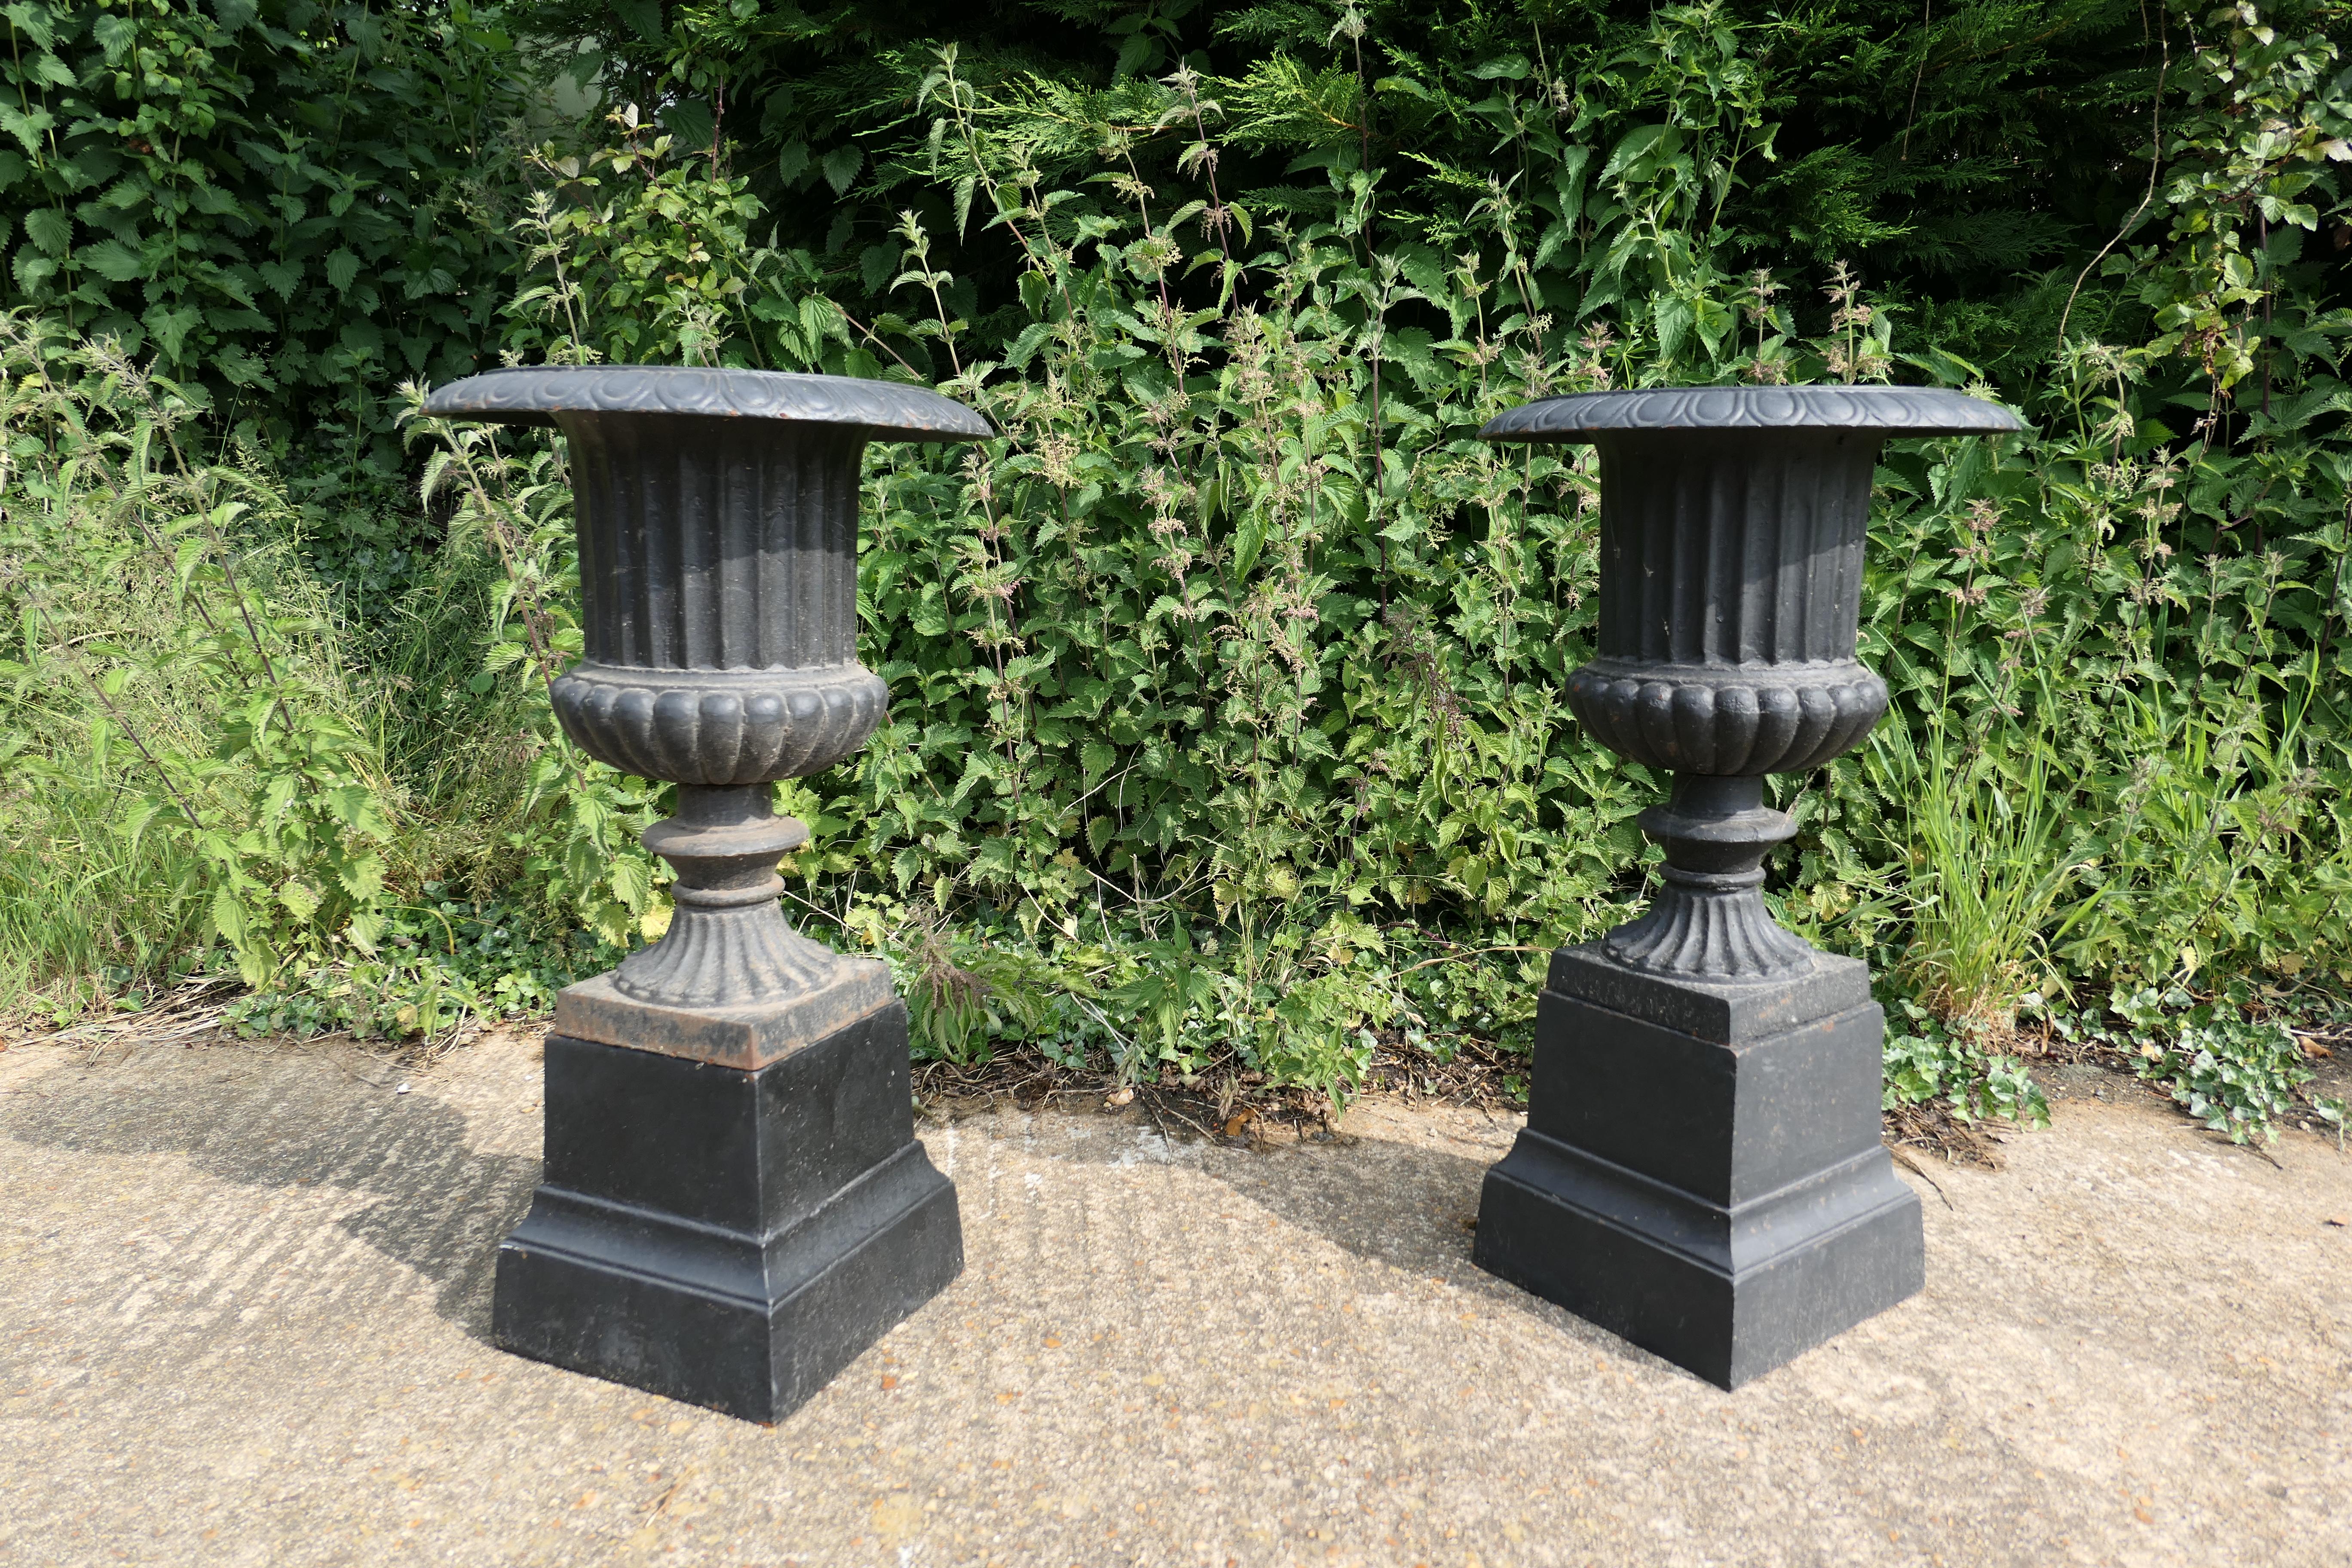 Pair of tall weathered cast iron Urns, garden planters

This is a superb pair of urns on plinths
The urns and stands are in very good weathered condition 
These are heavy pieces needless to say 
The total height of the urns is 29”, 17” in